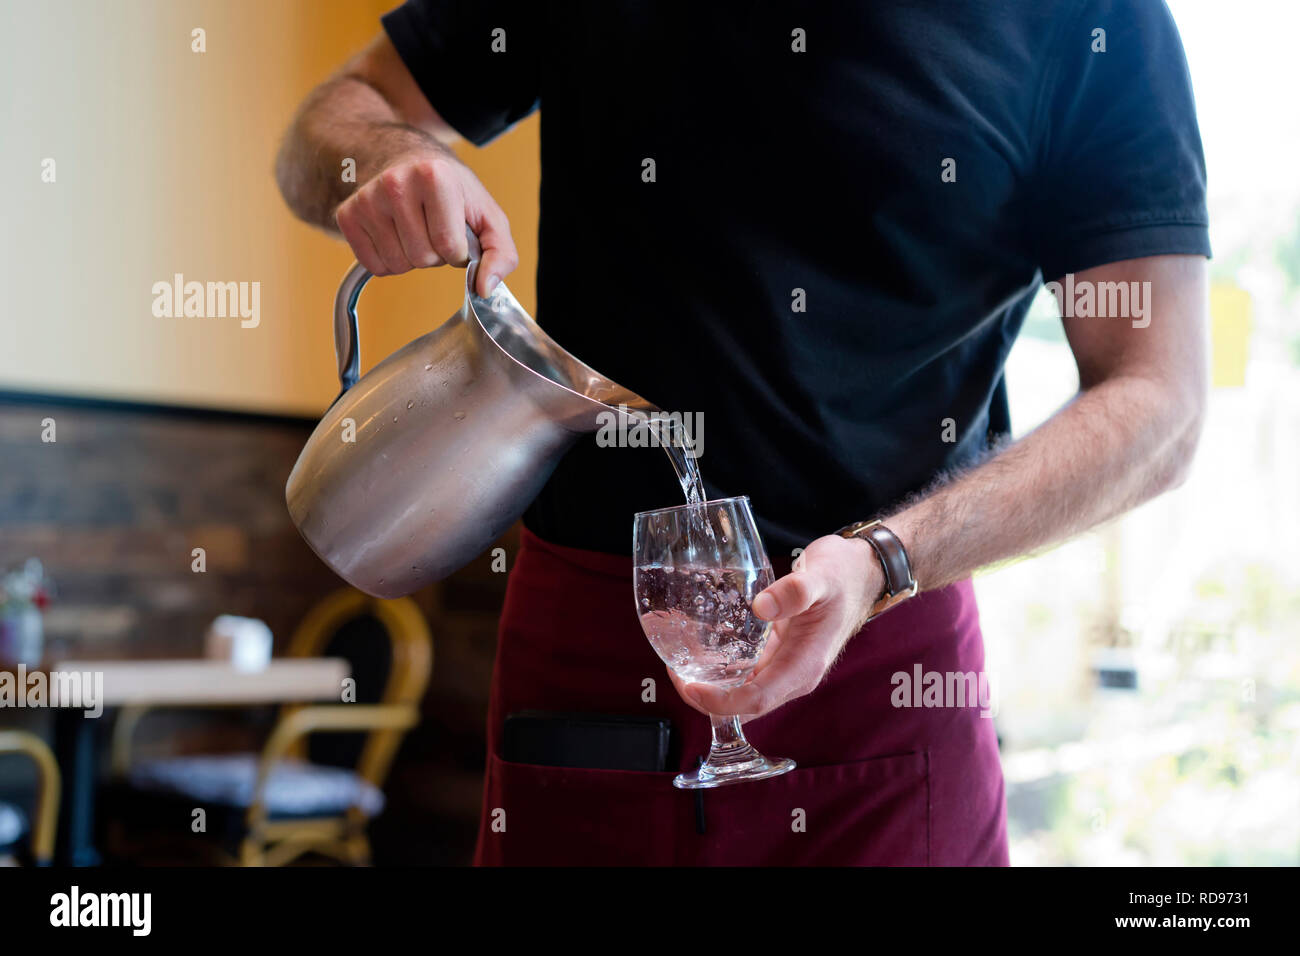 Strong slim man with muscular muscles working as a waiter in a restaurant in a black t-shirt and burgundy apron pours water from a stainless steel jug Stock Photo